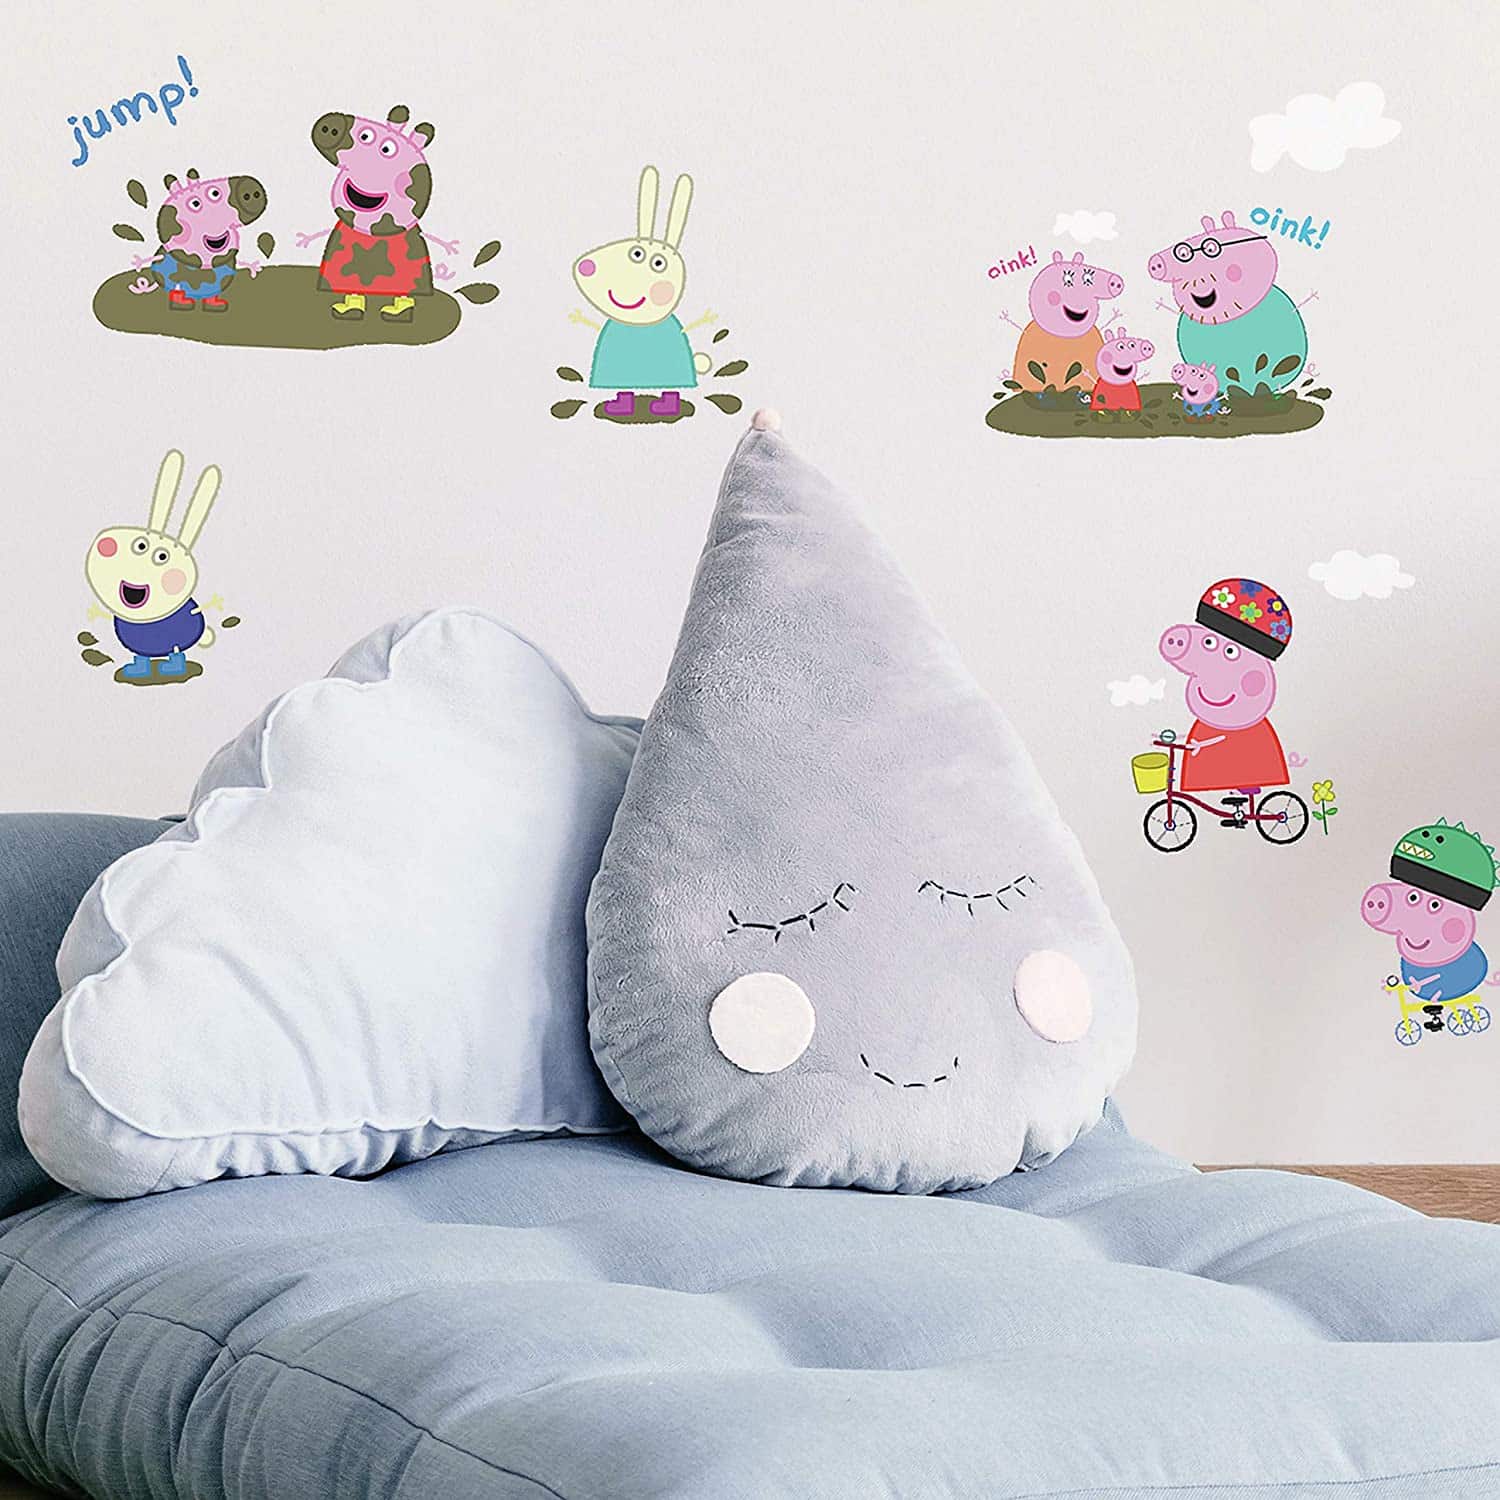 Peppa Pig Wallpaper and Decals – March 2023